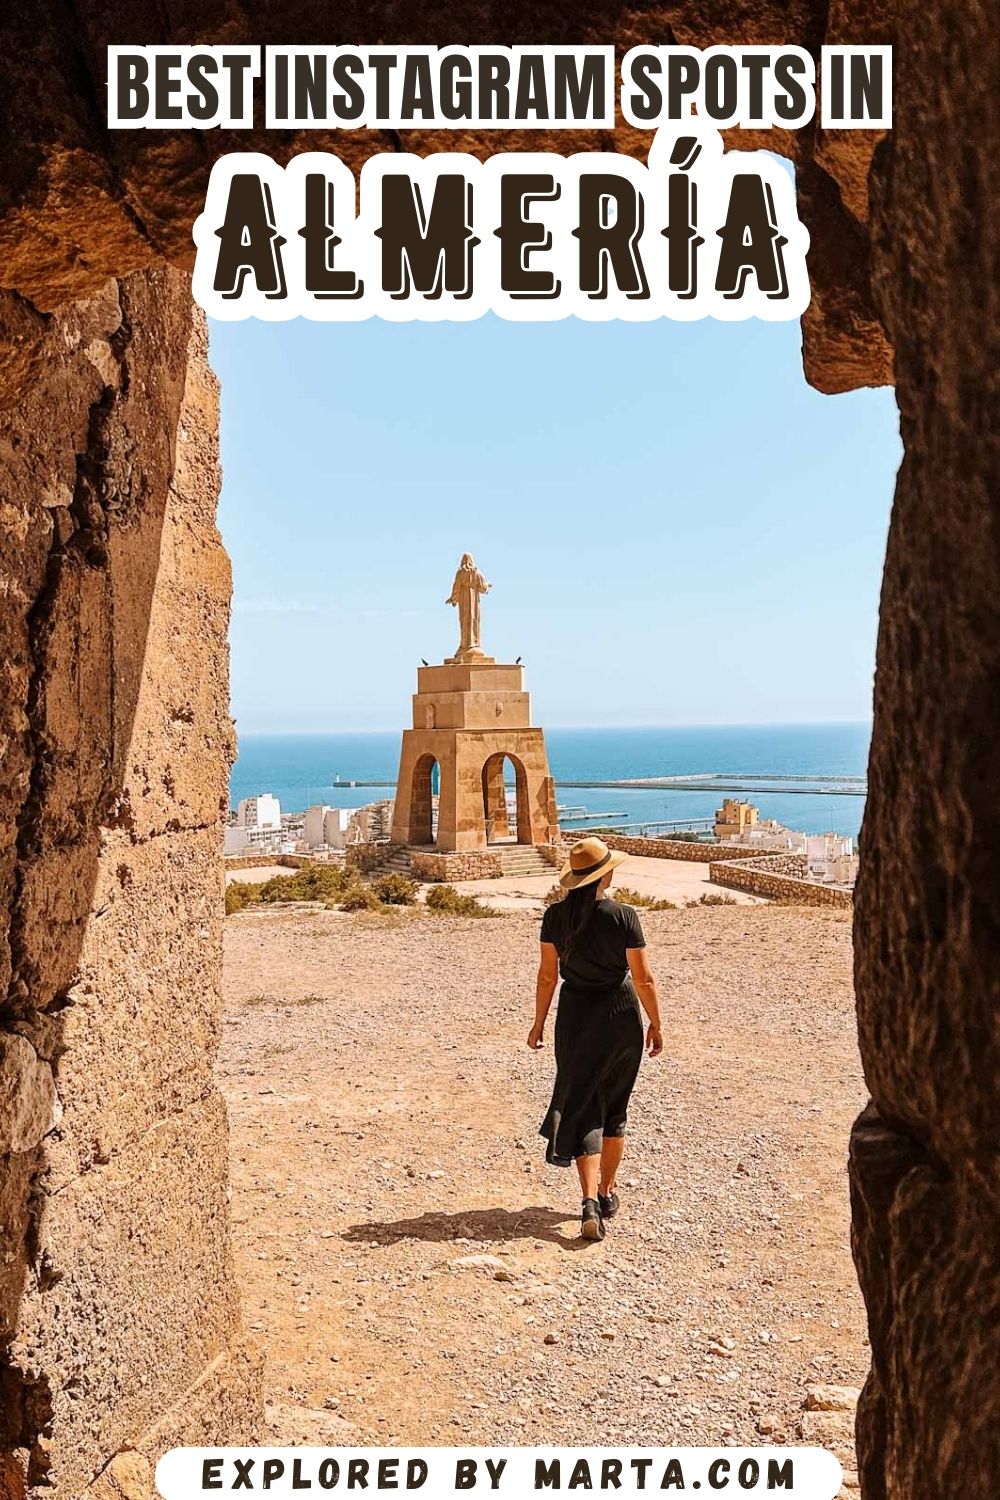 Amazing Instagram photo spots and instagrammable places in Almeria, Spain